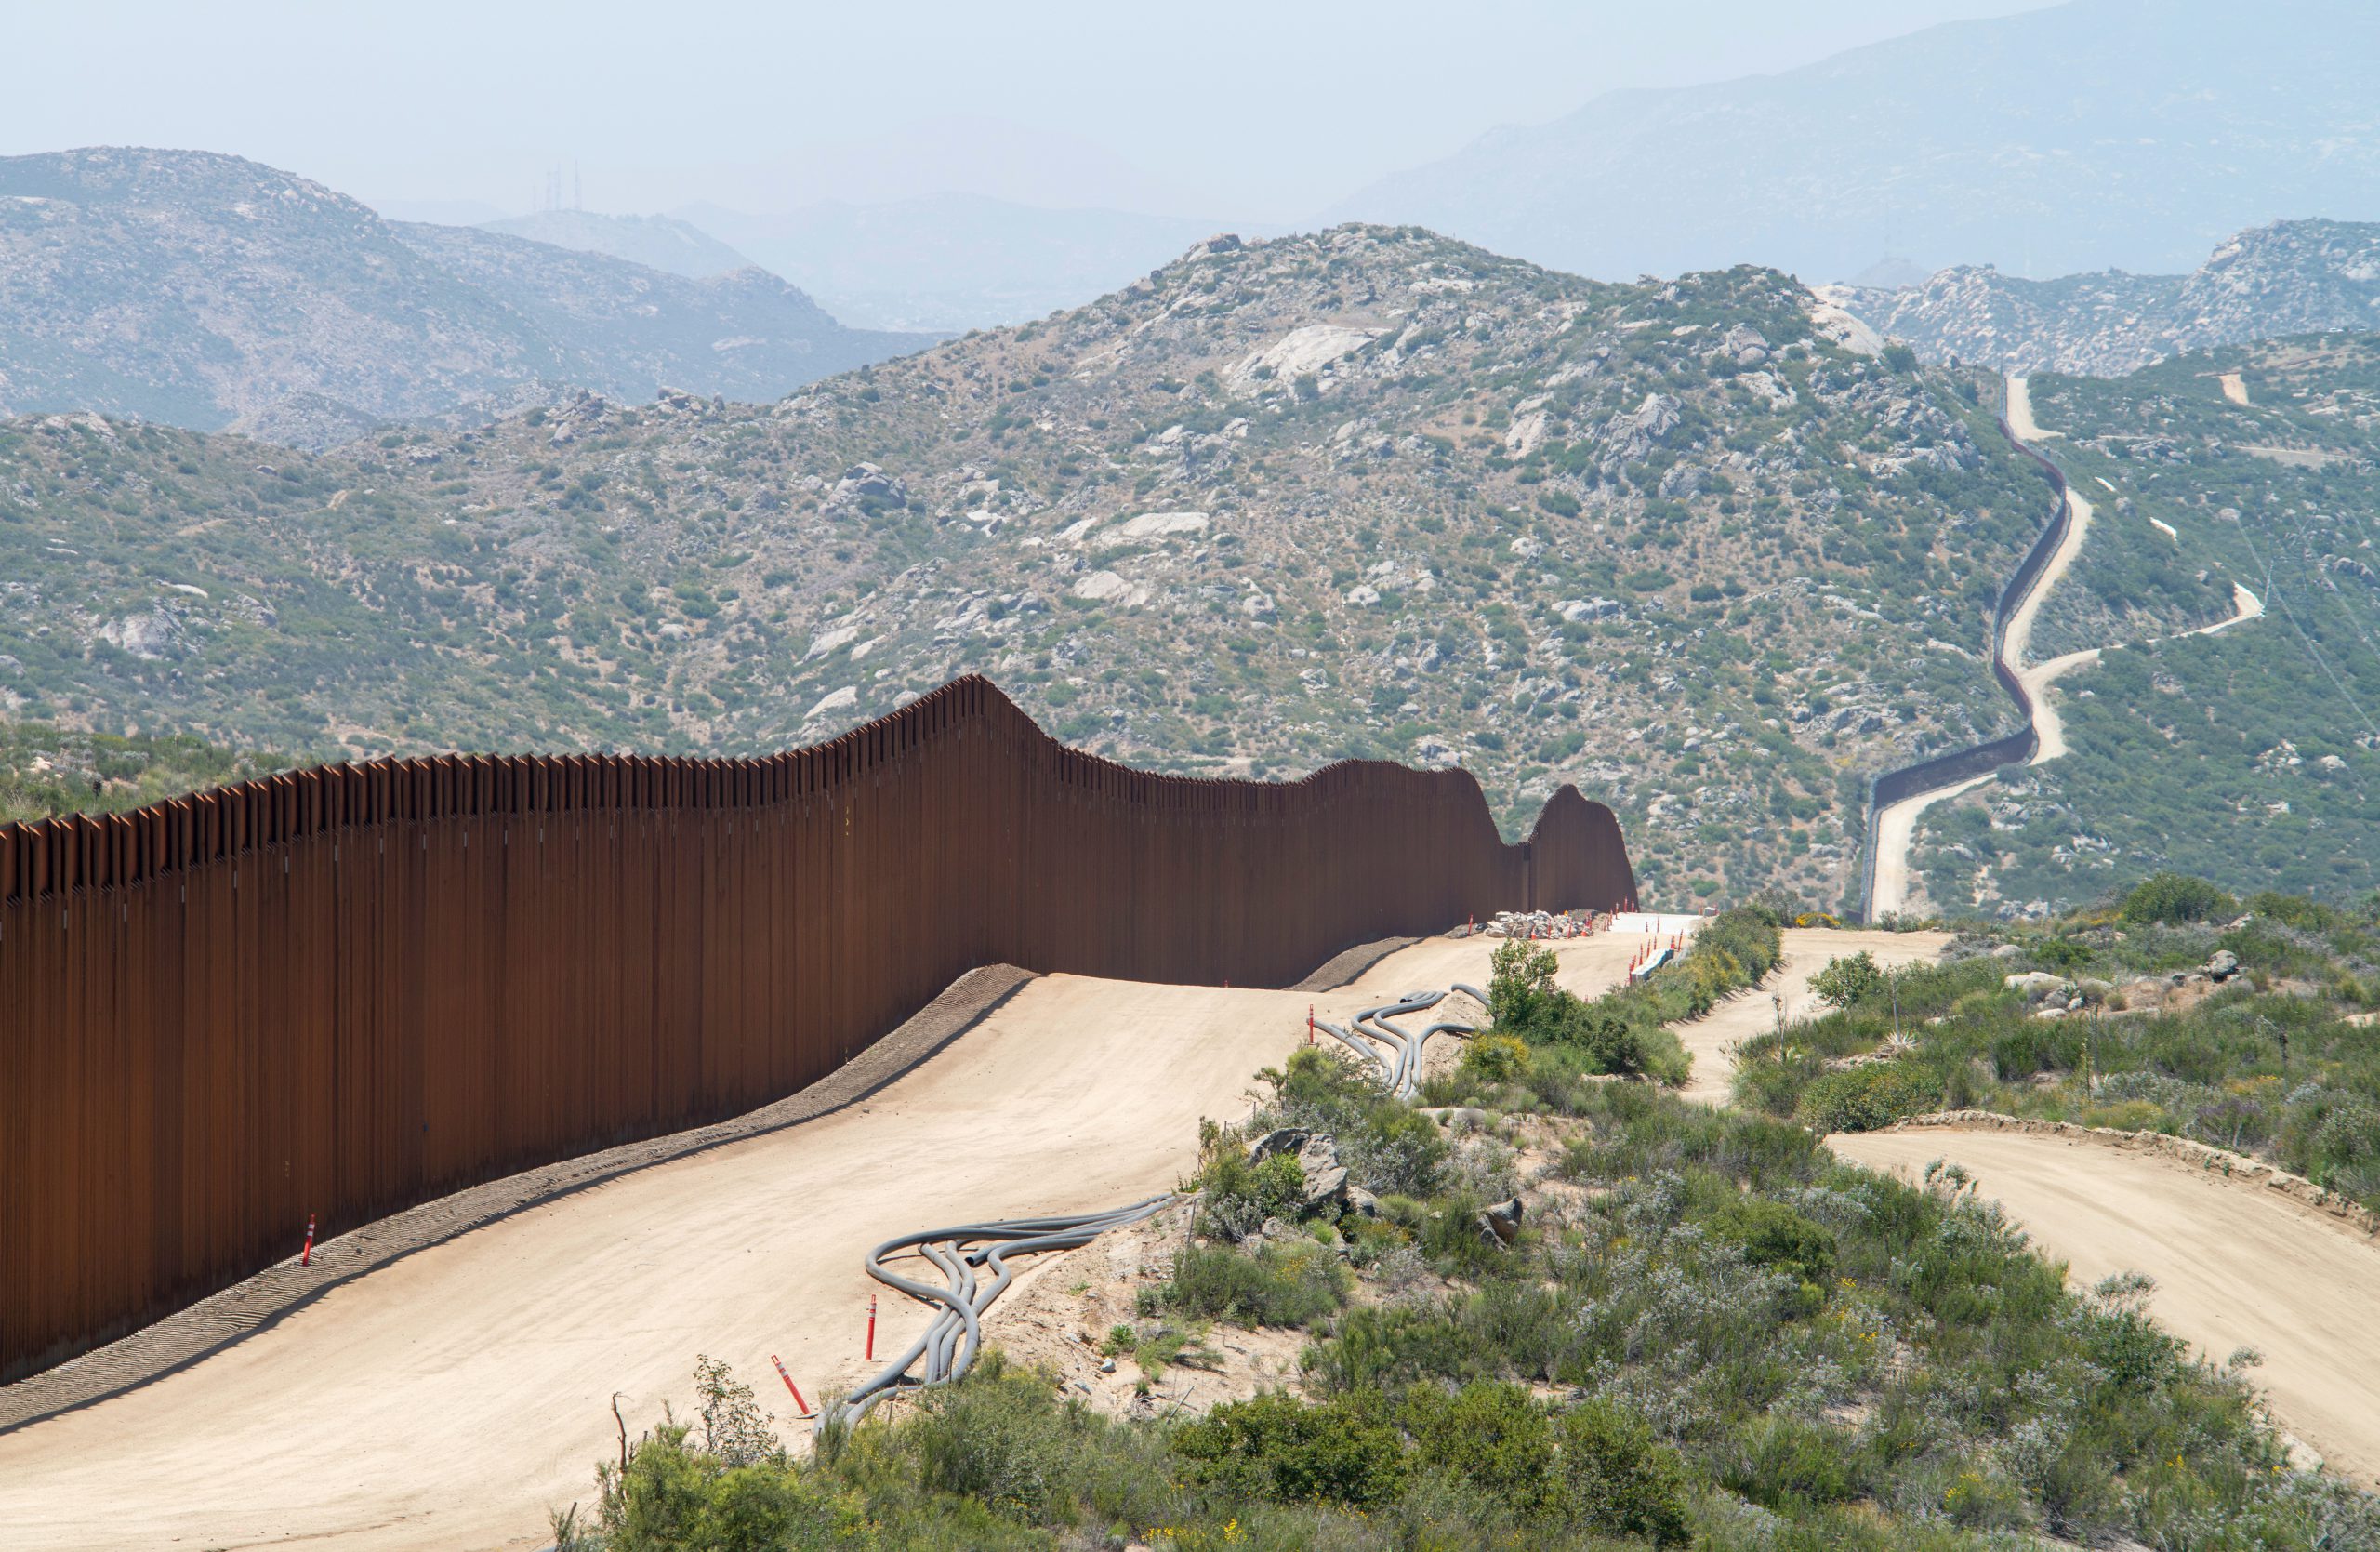 Image of the border wall separating Mexico and the US in California